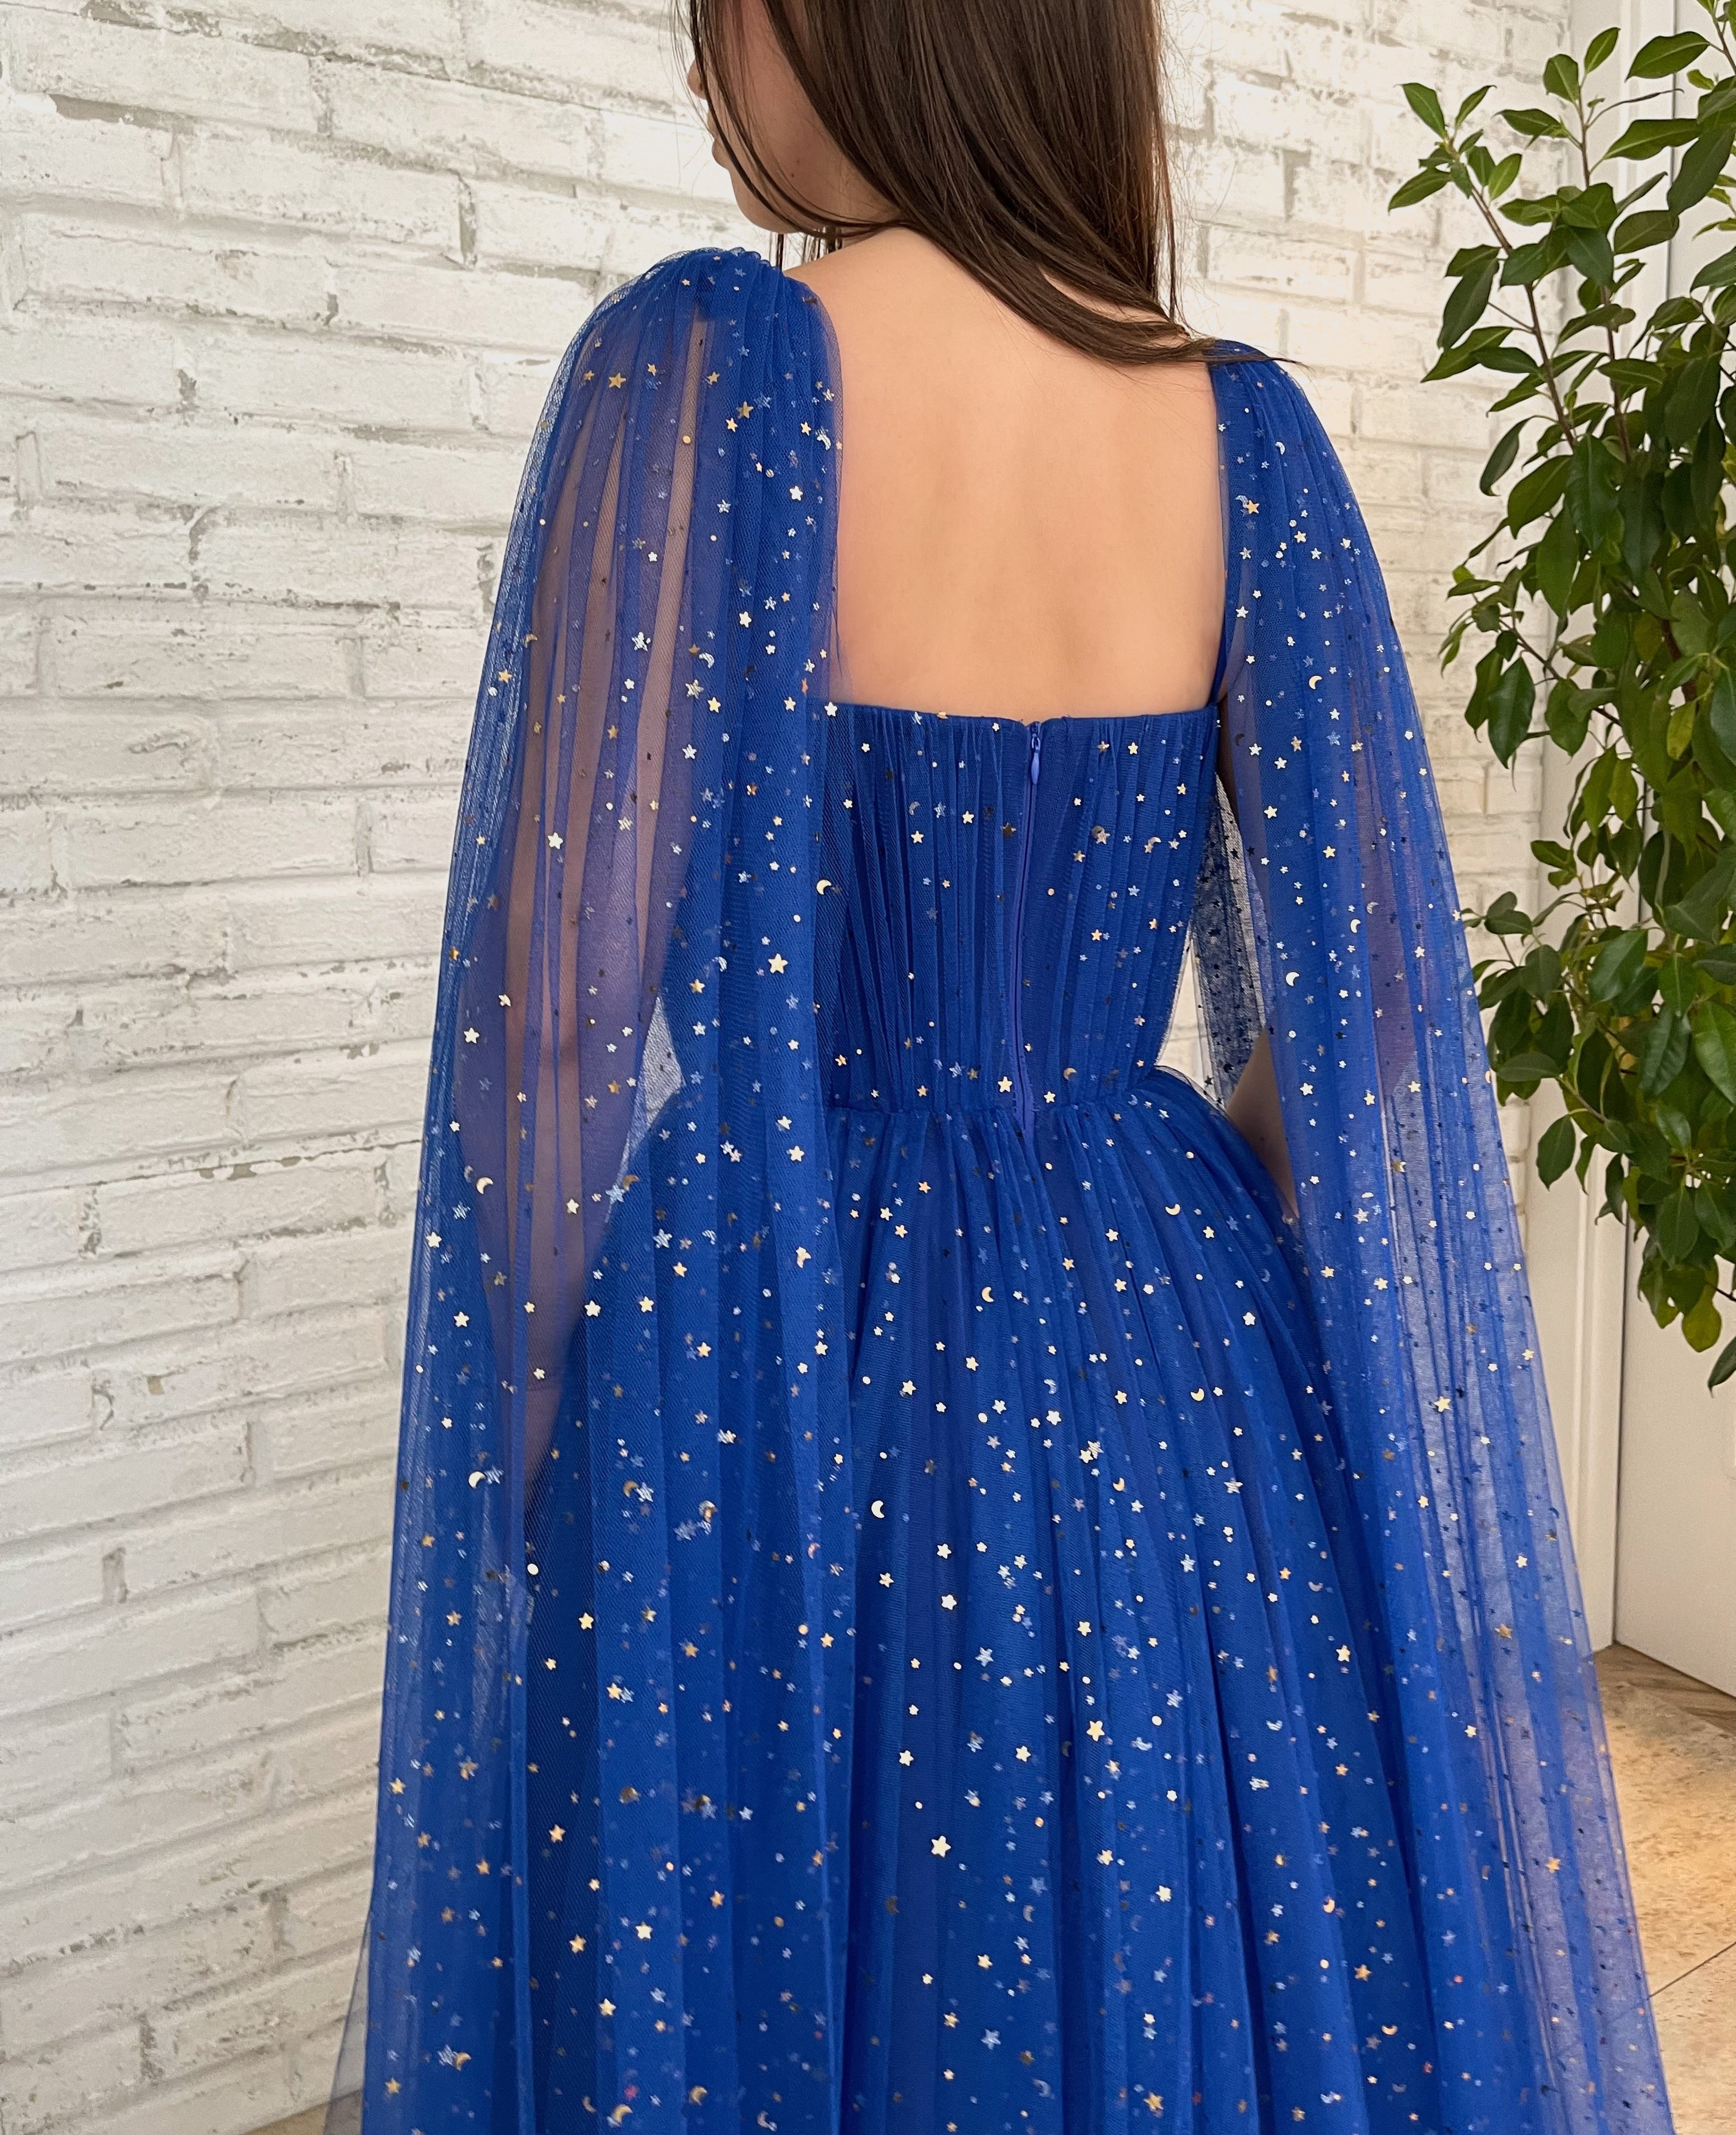 Blue A-Line dress with cape sleeves, spaghetti straps and starry fabric